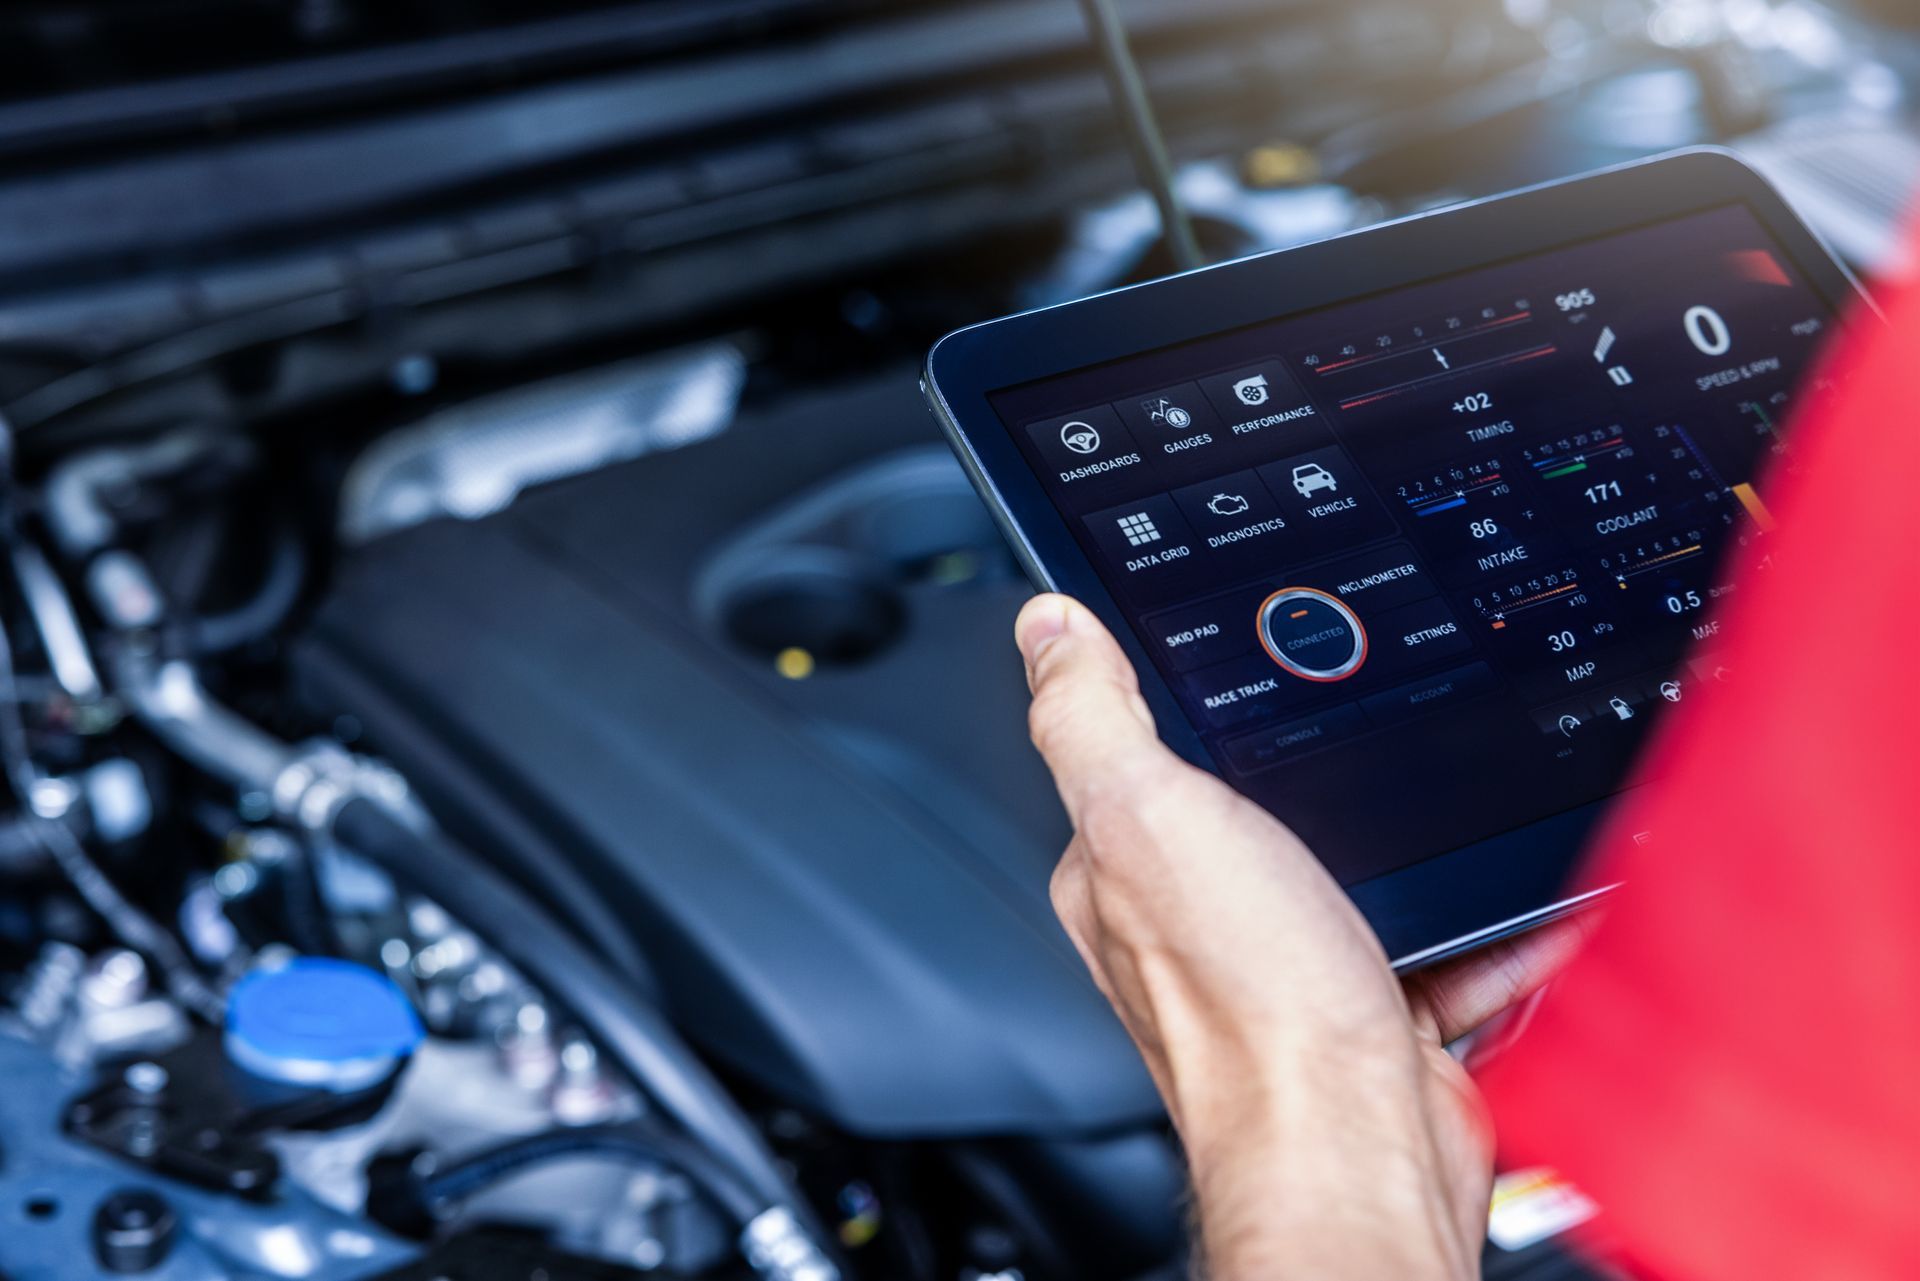 Digital Inspections at ﻿Northuis Auto Repair﻿ in ﻿Jenison, MI﻿